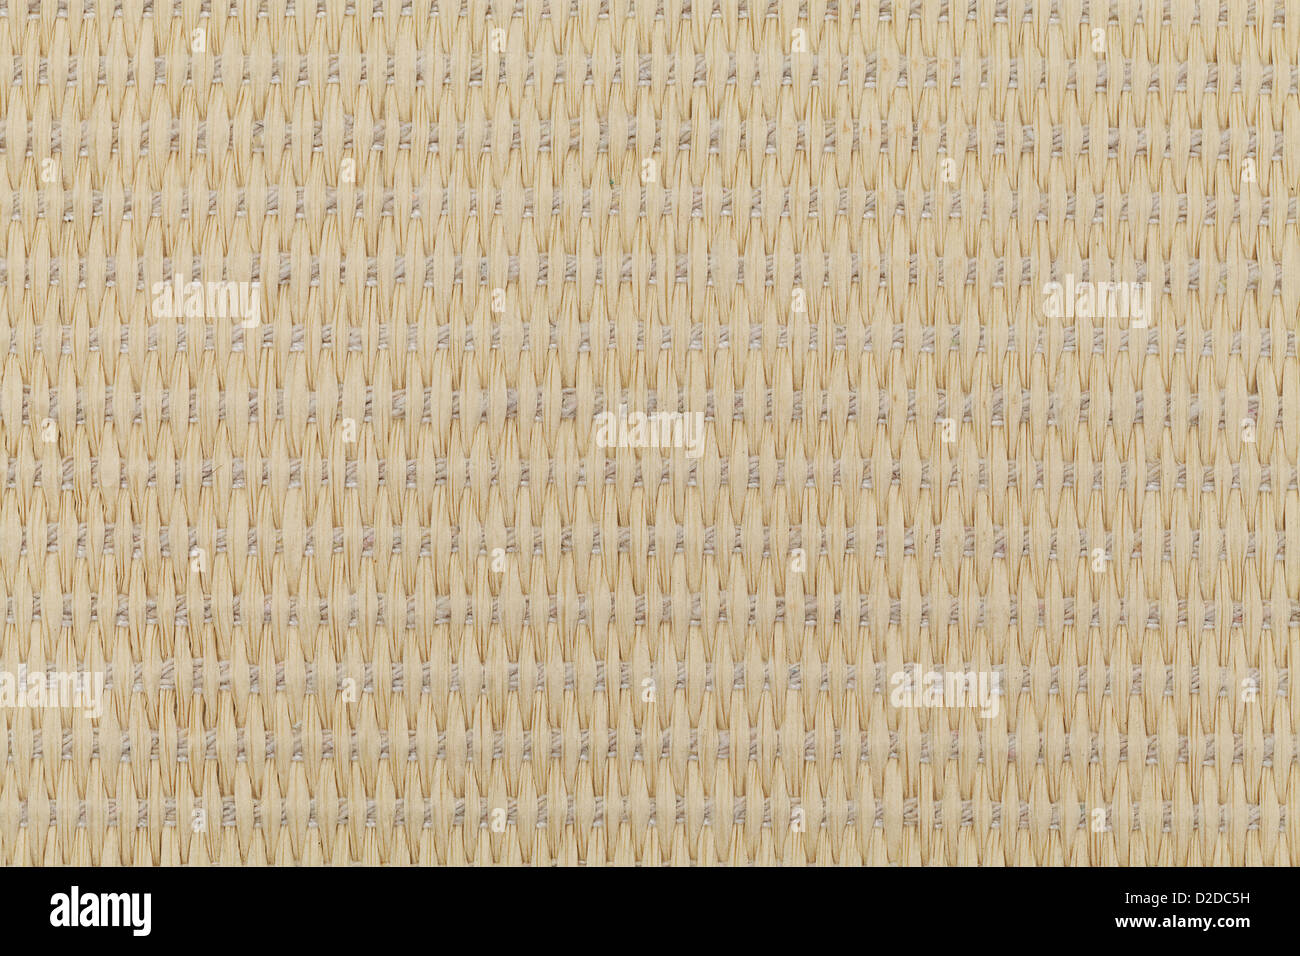 Close-up photo of weaving of straw and flax Stock Photo